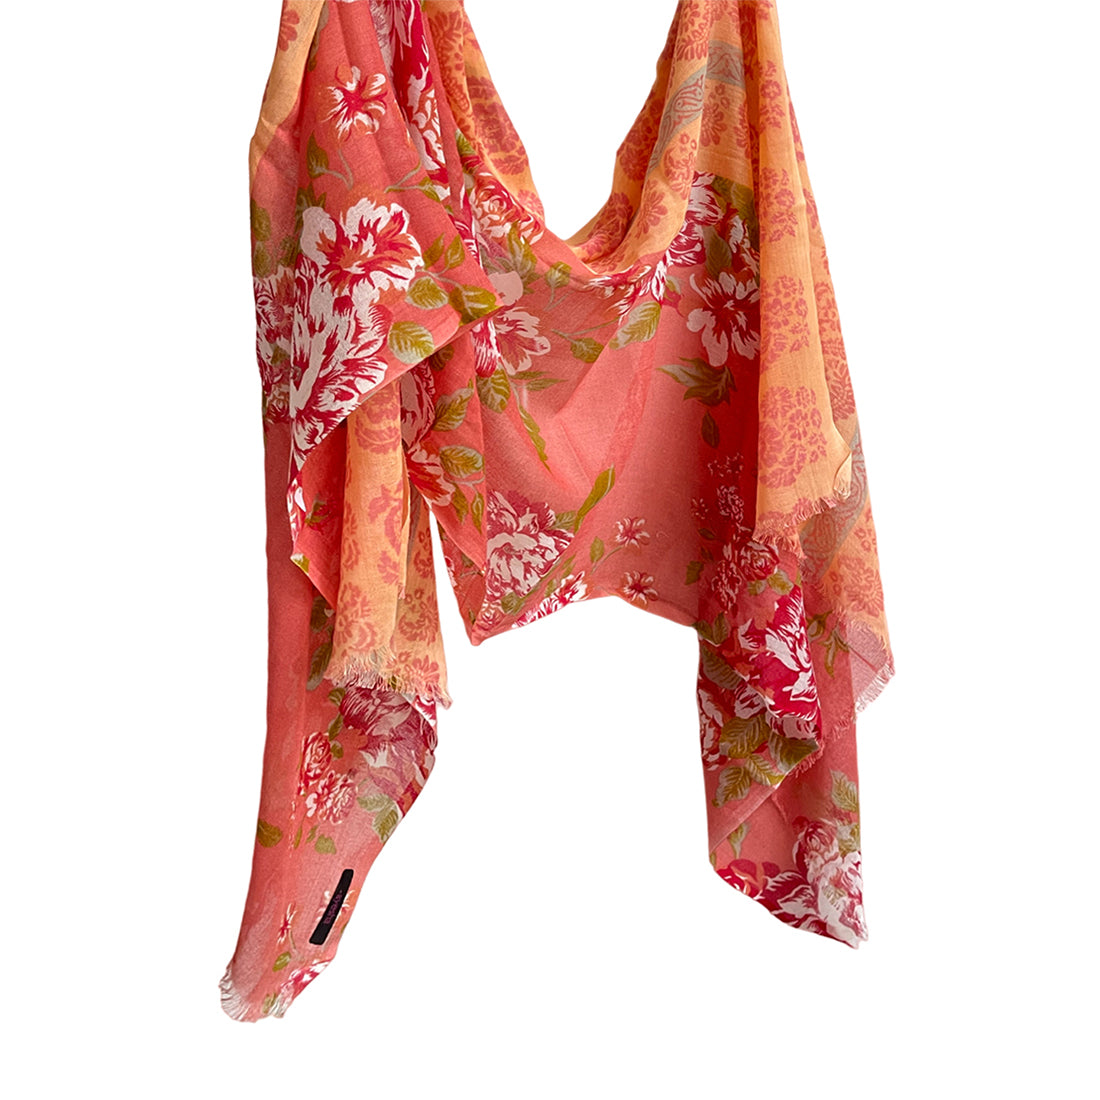 Orange & White Double Shaded Abstract Rose Floral & Motifs Printed Viscose Scarf